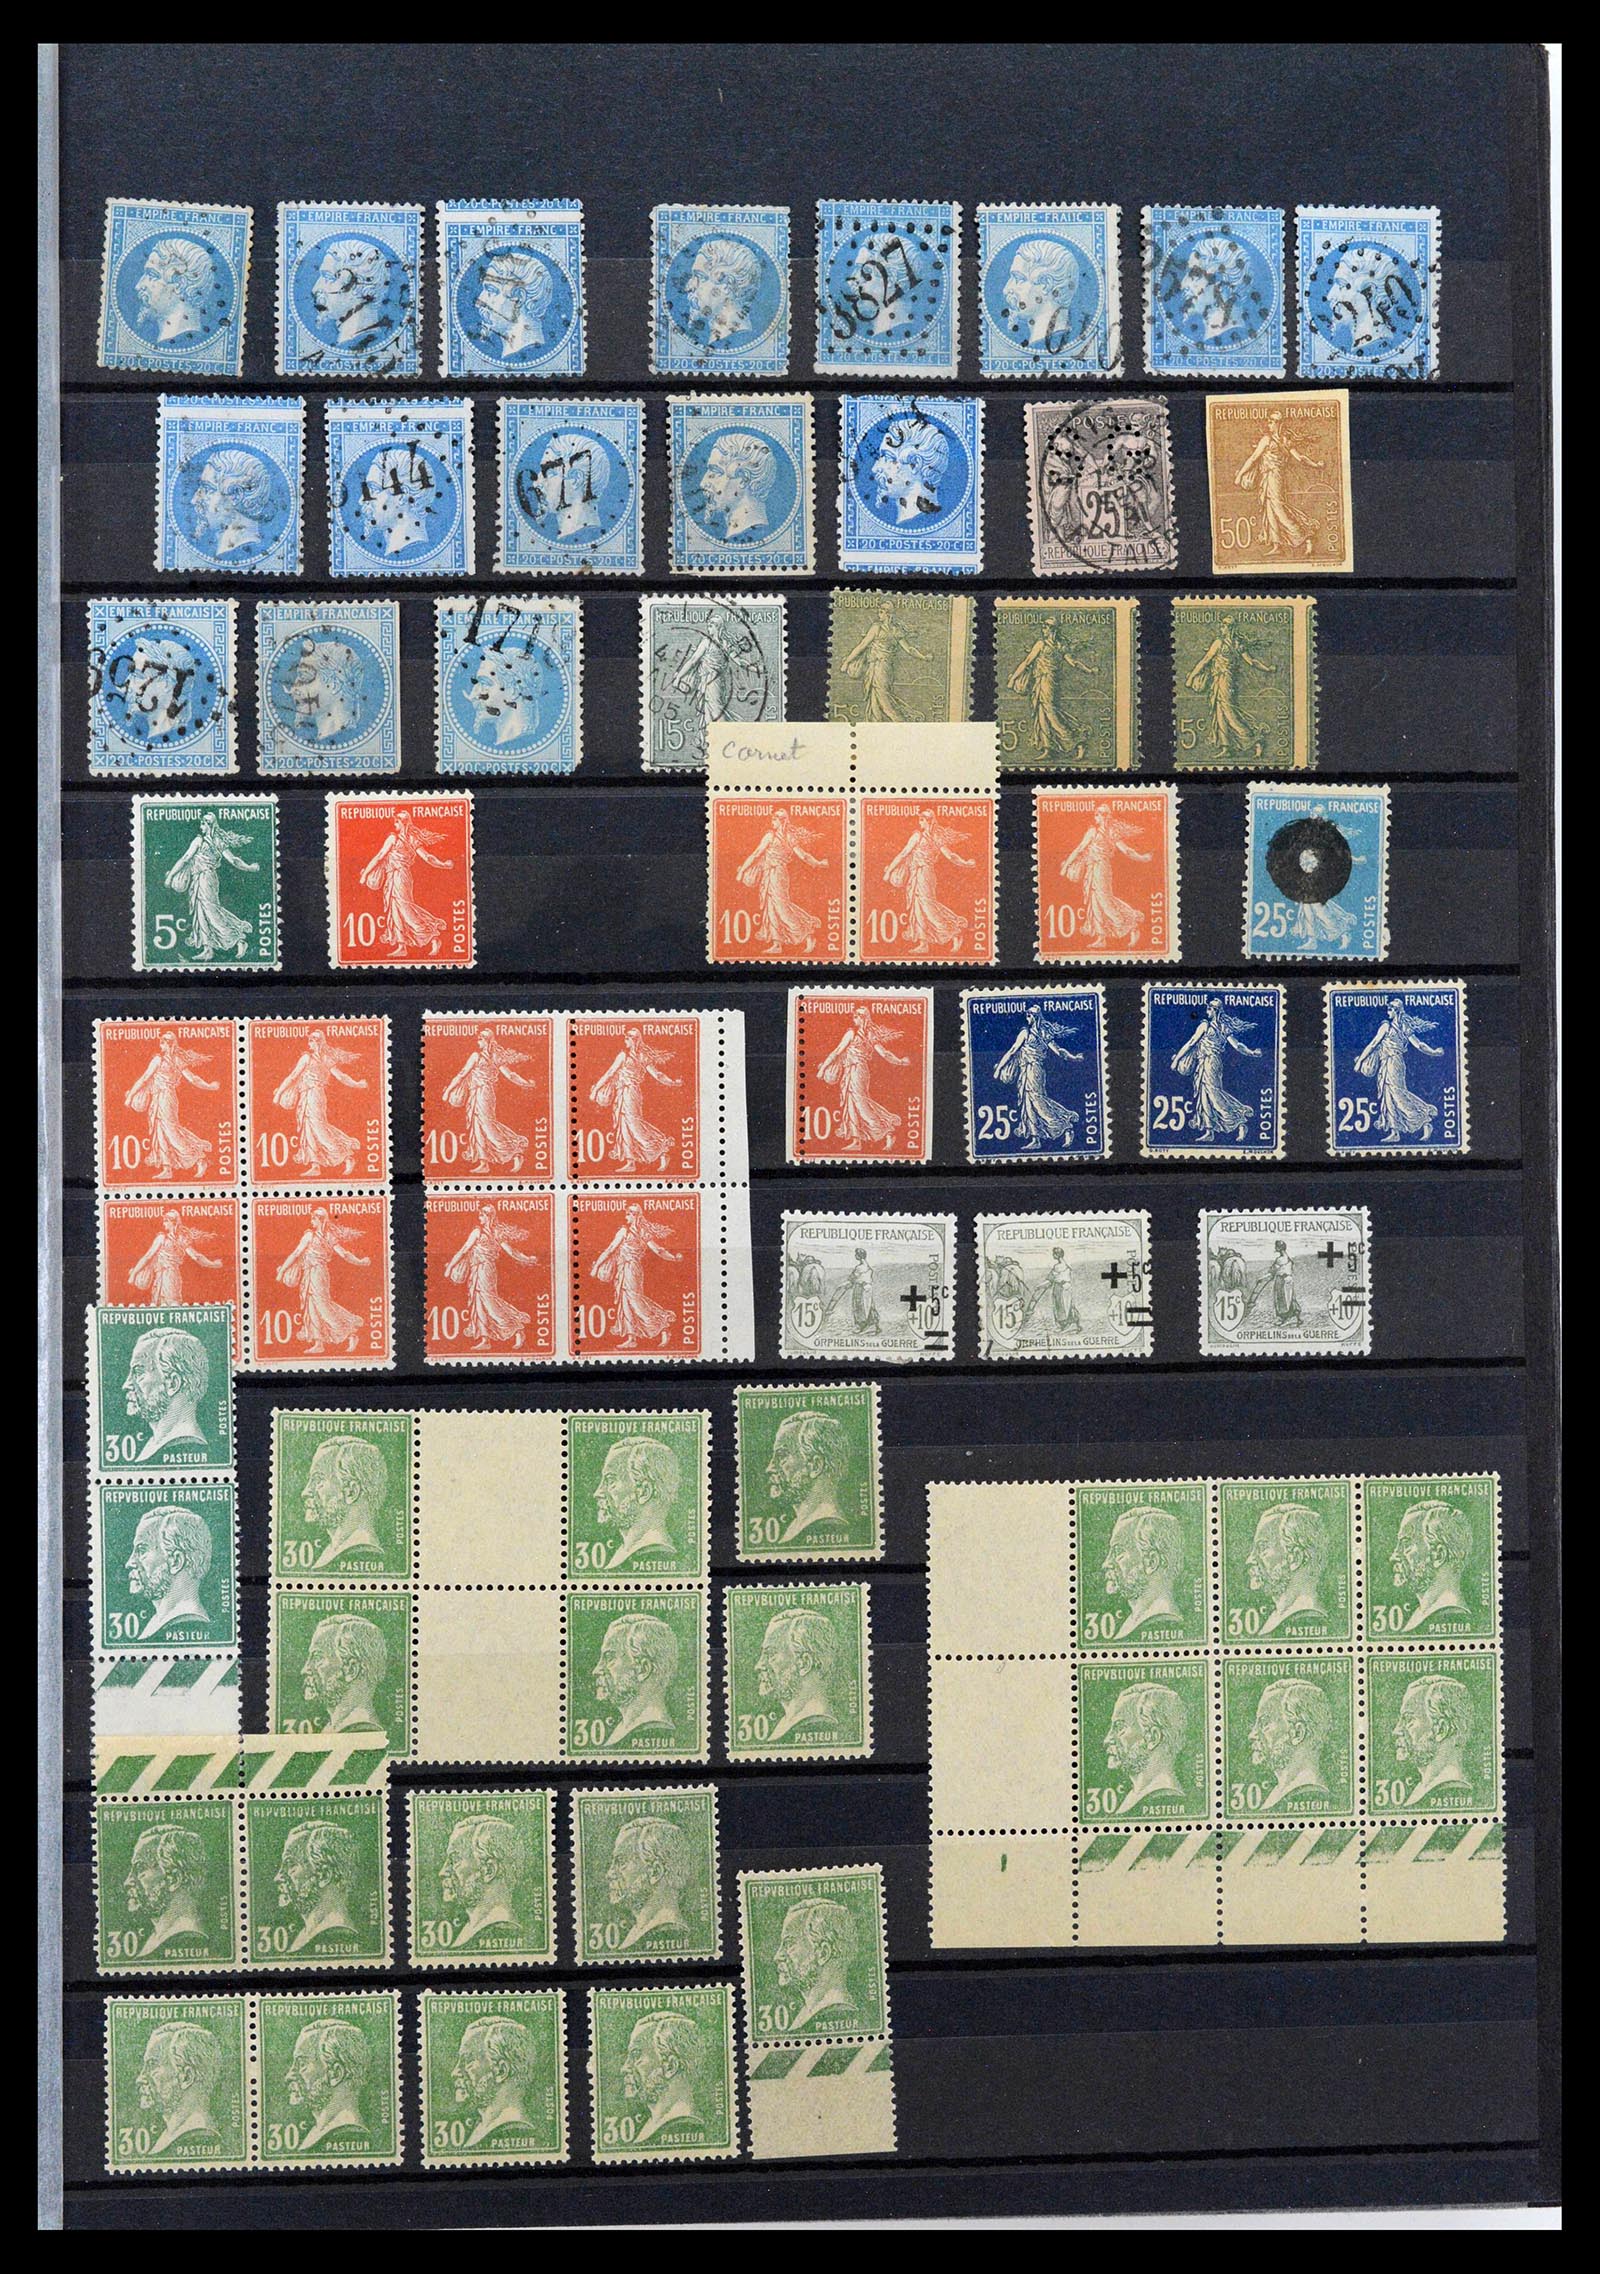 39423 0001 - Stamp collection 39423 France varieties 1862-1985.